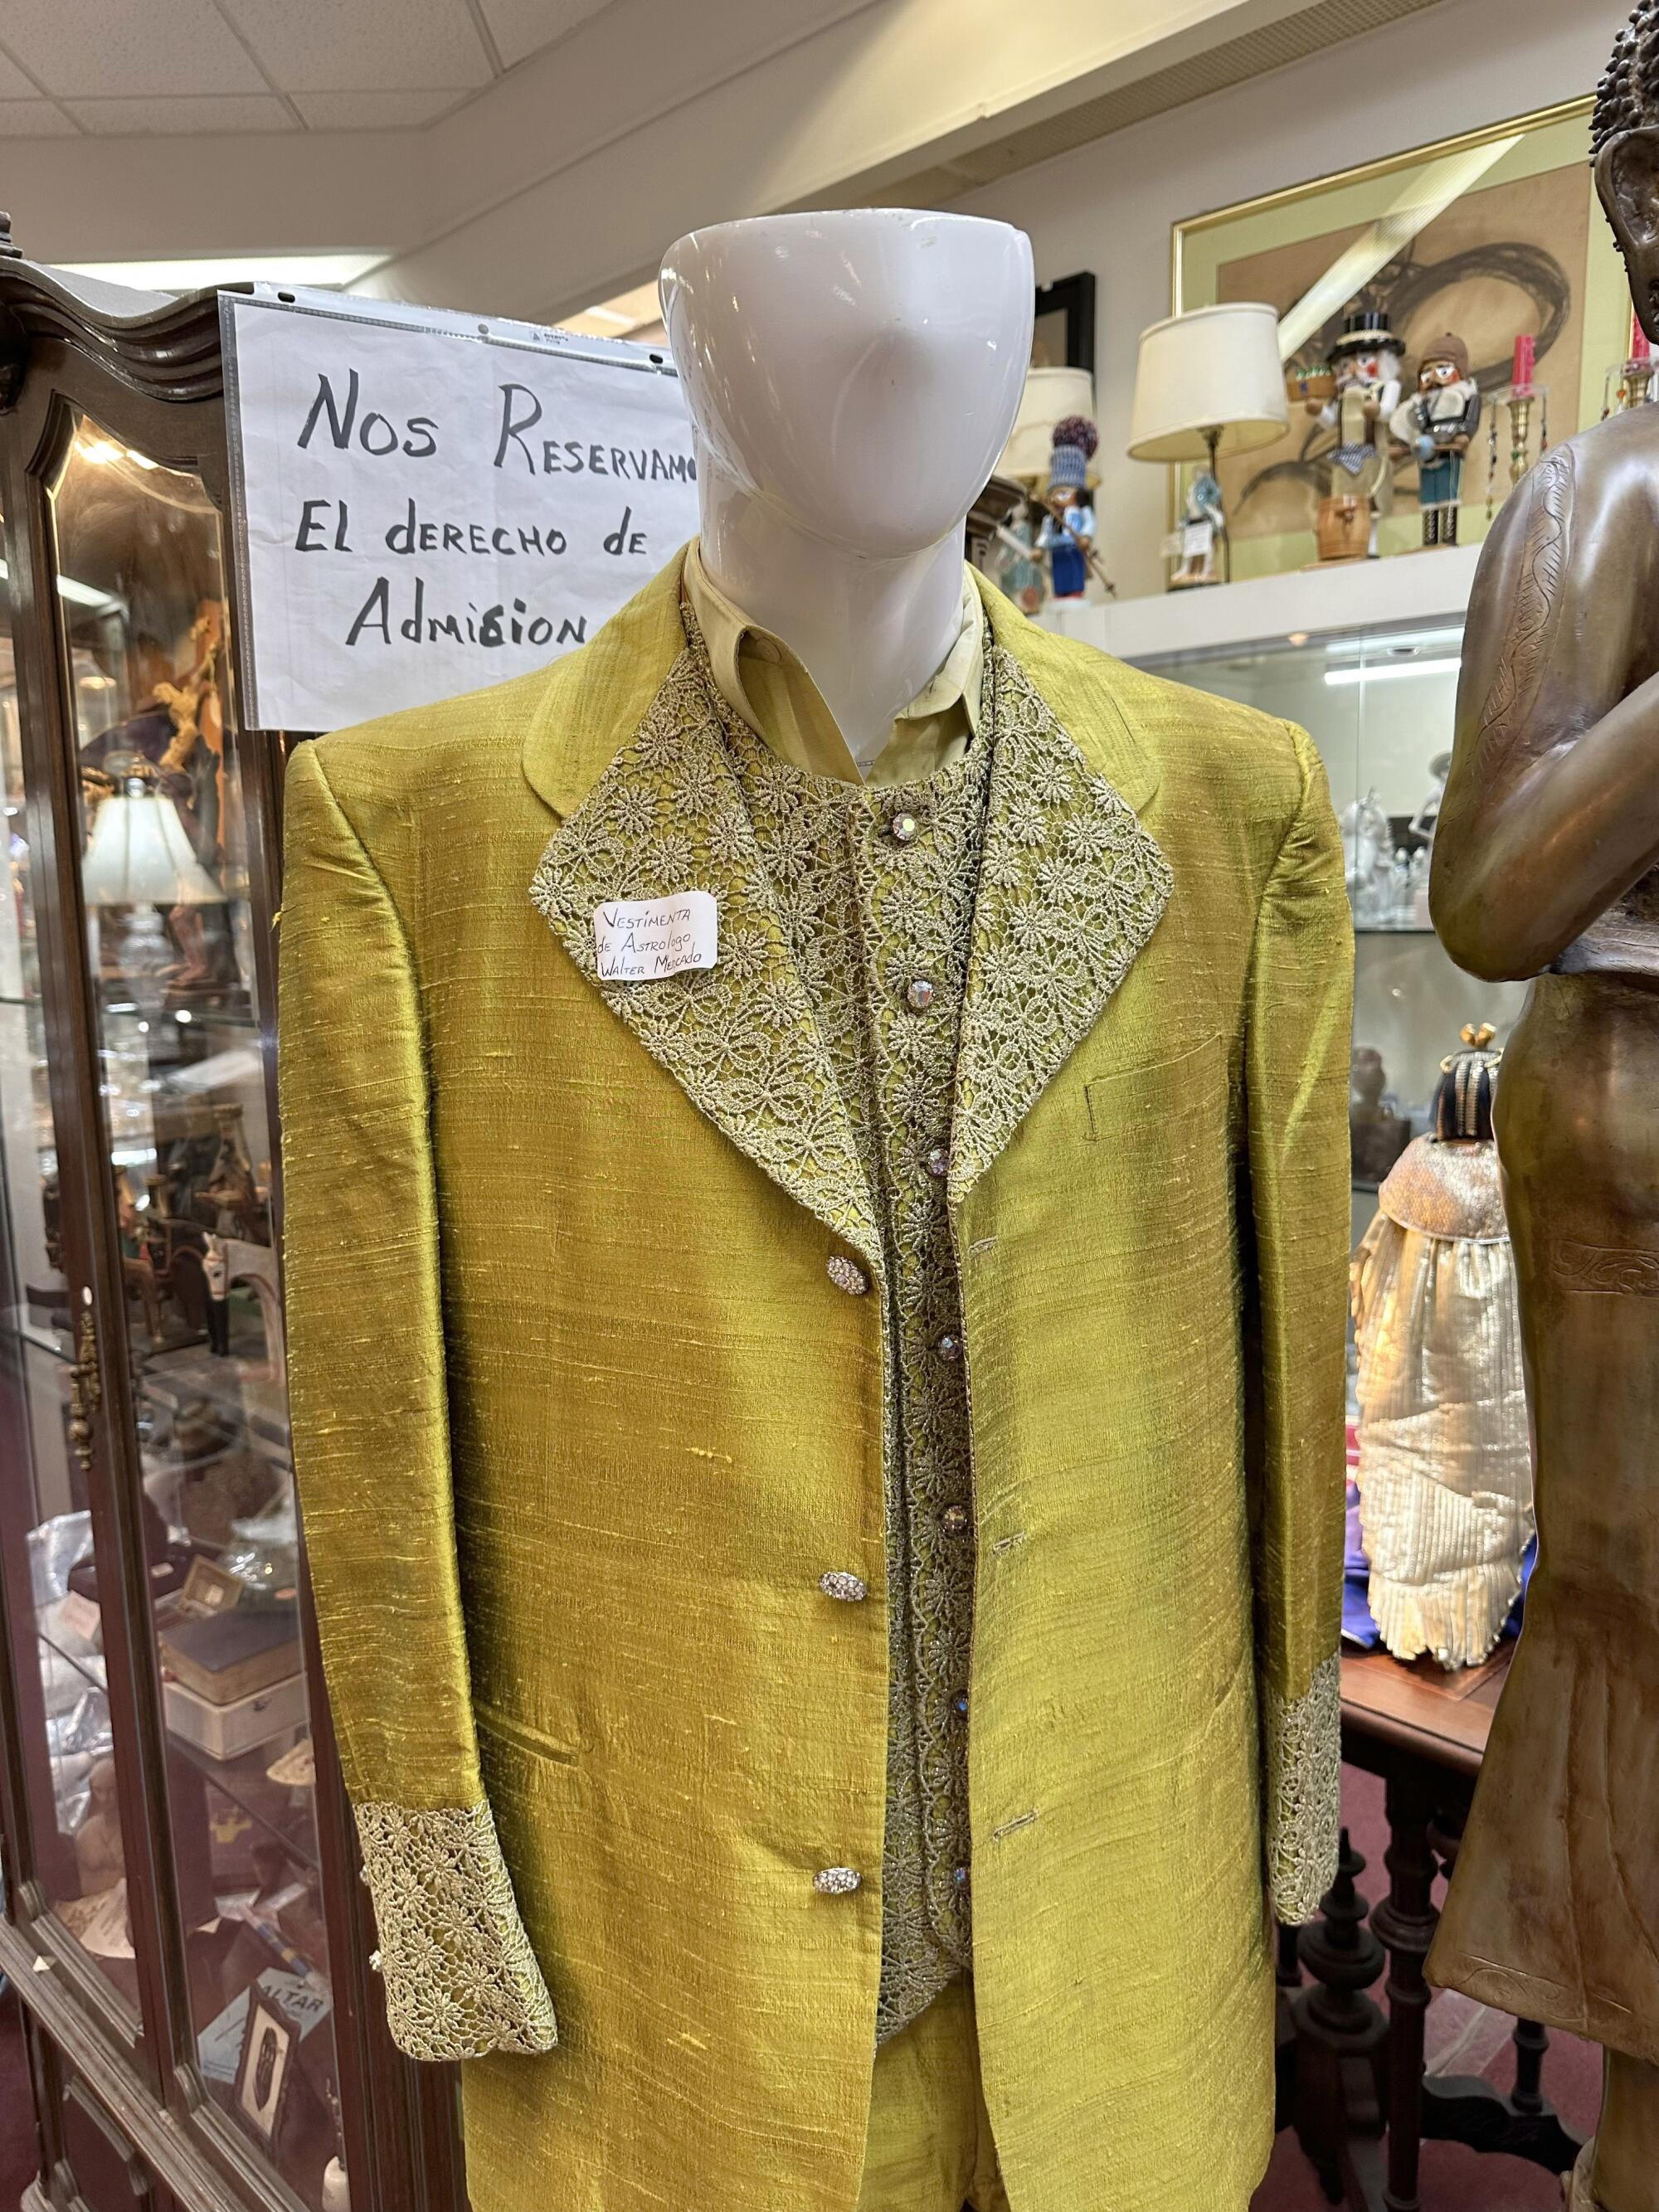 A mannequin in a yellow shirt, vest and jacket.